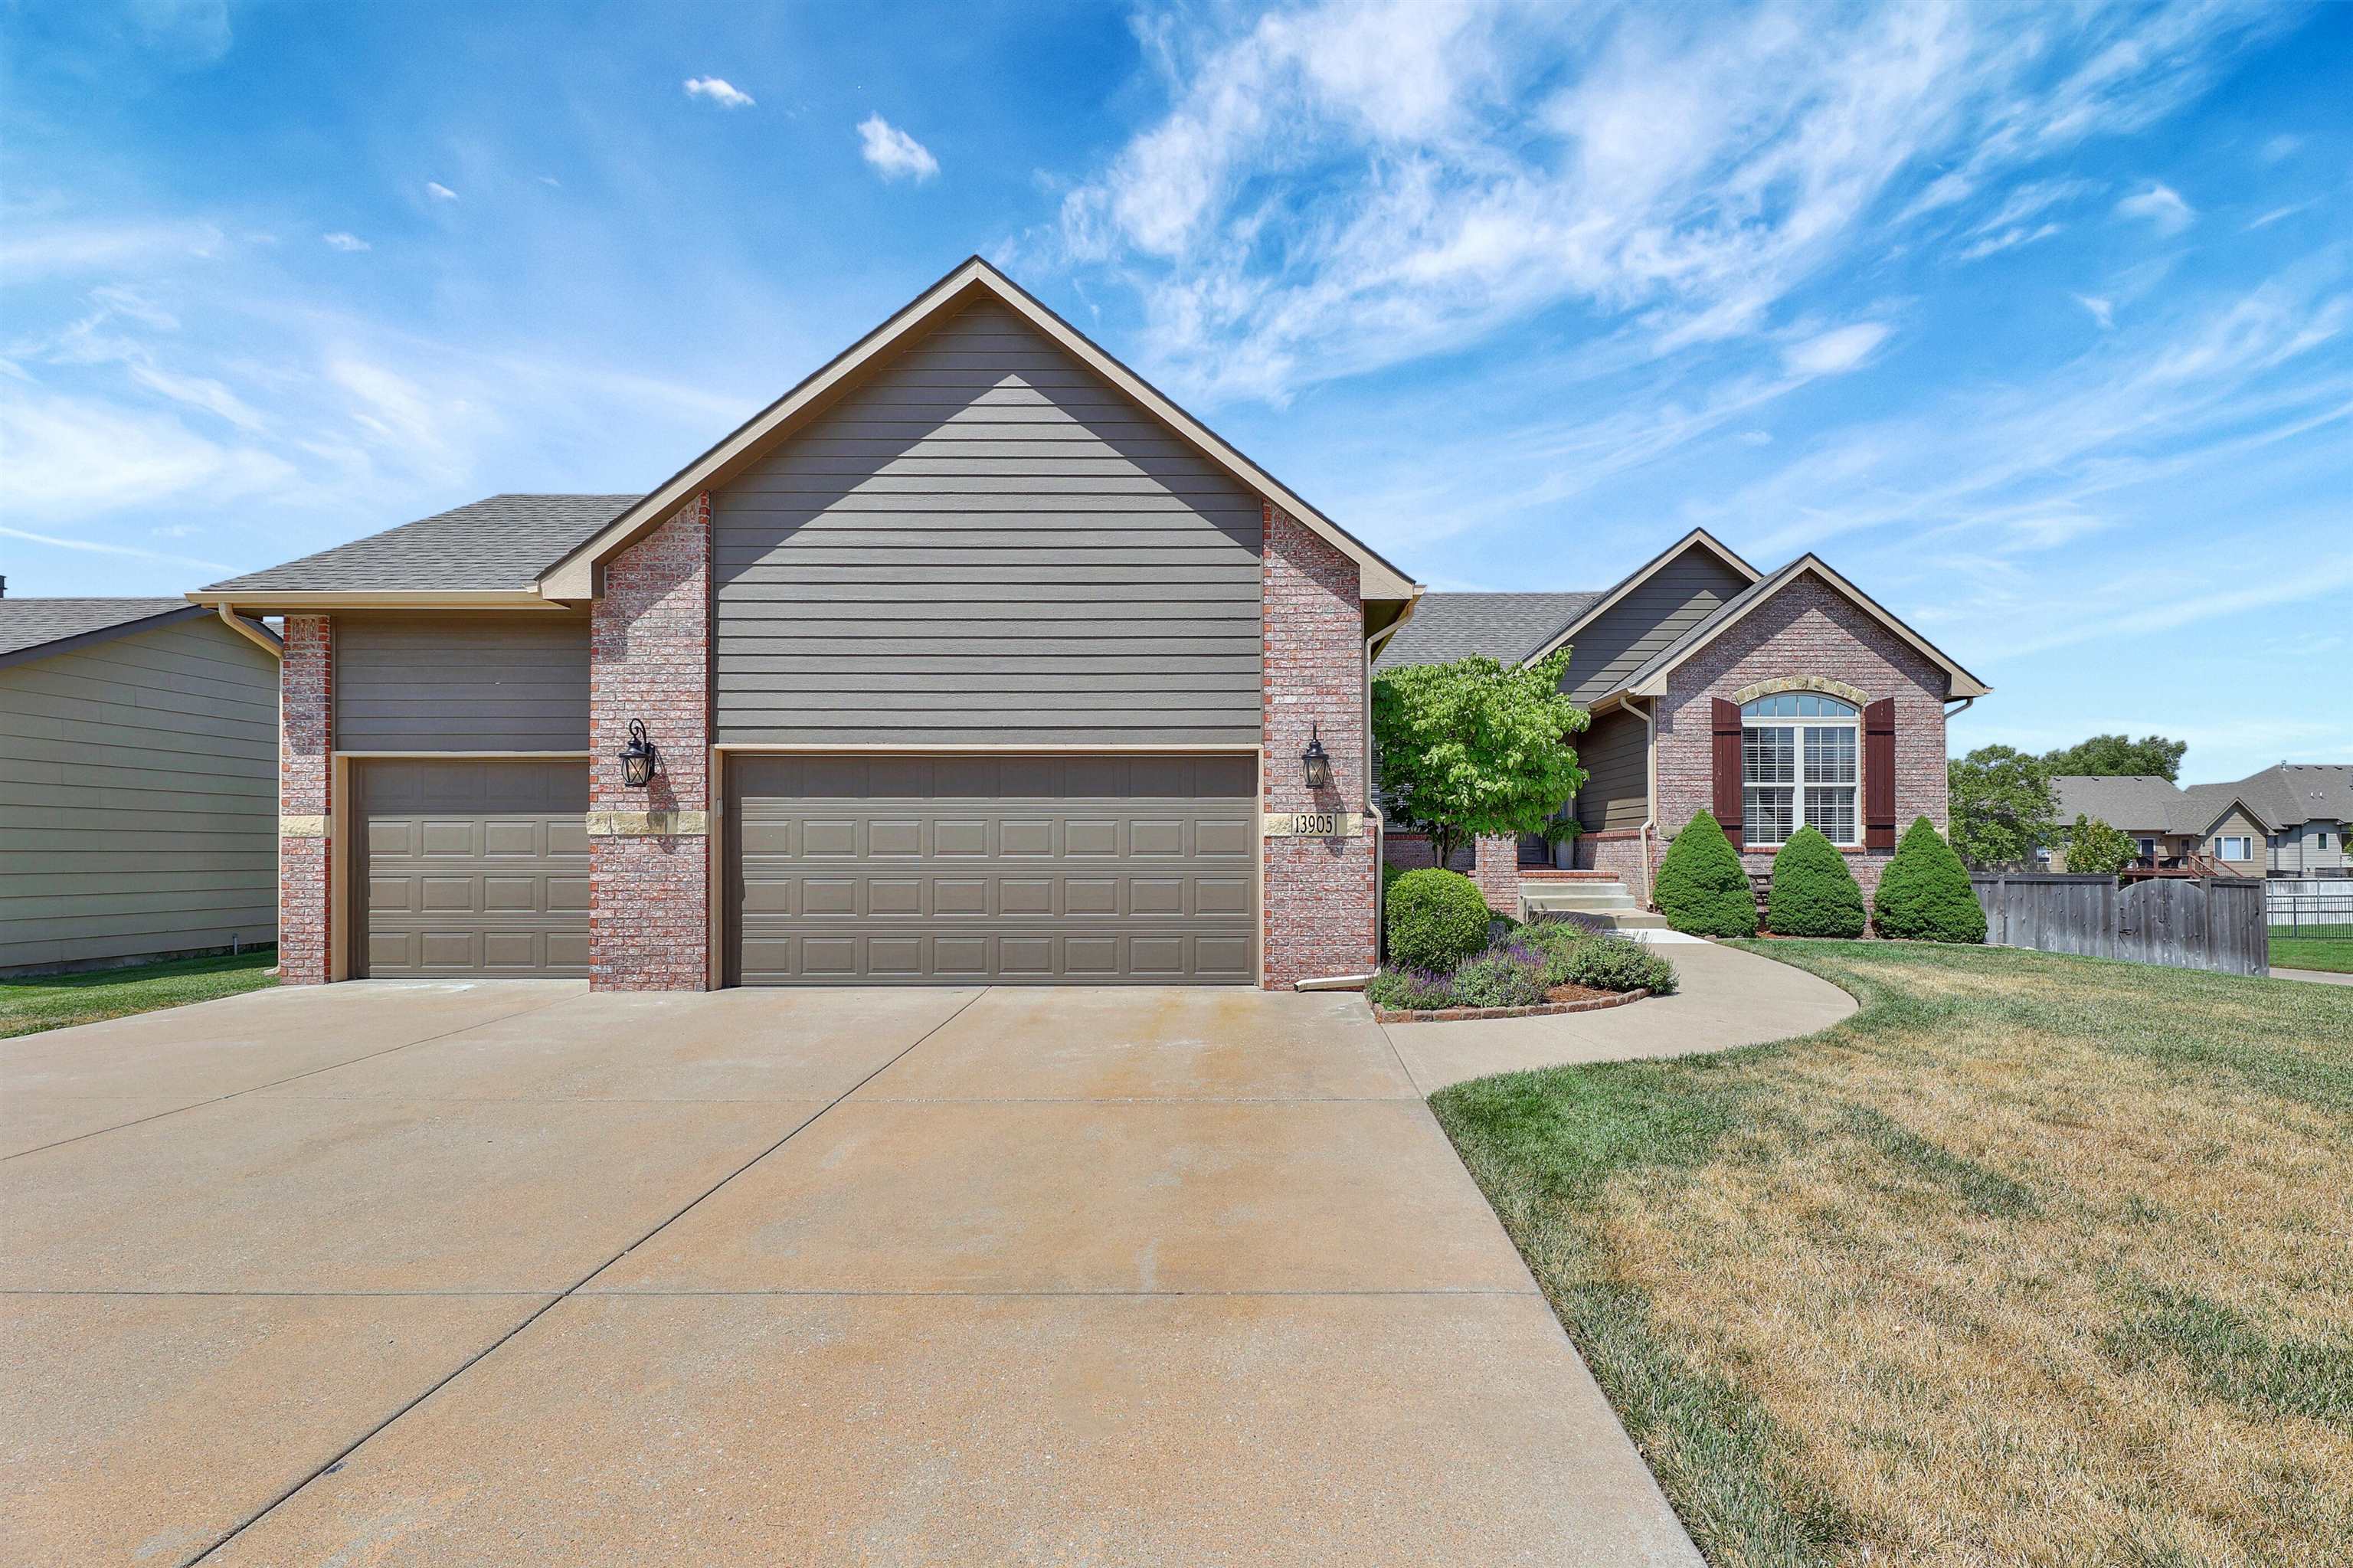 Welcome home to this incredible SIX bedroom, 3 bath home in East Wichita with Andover schools but Se